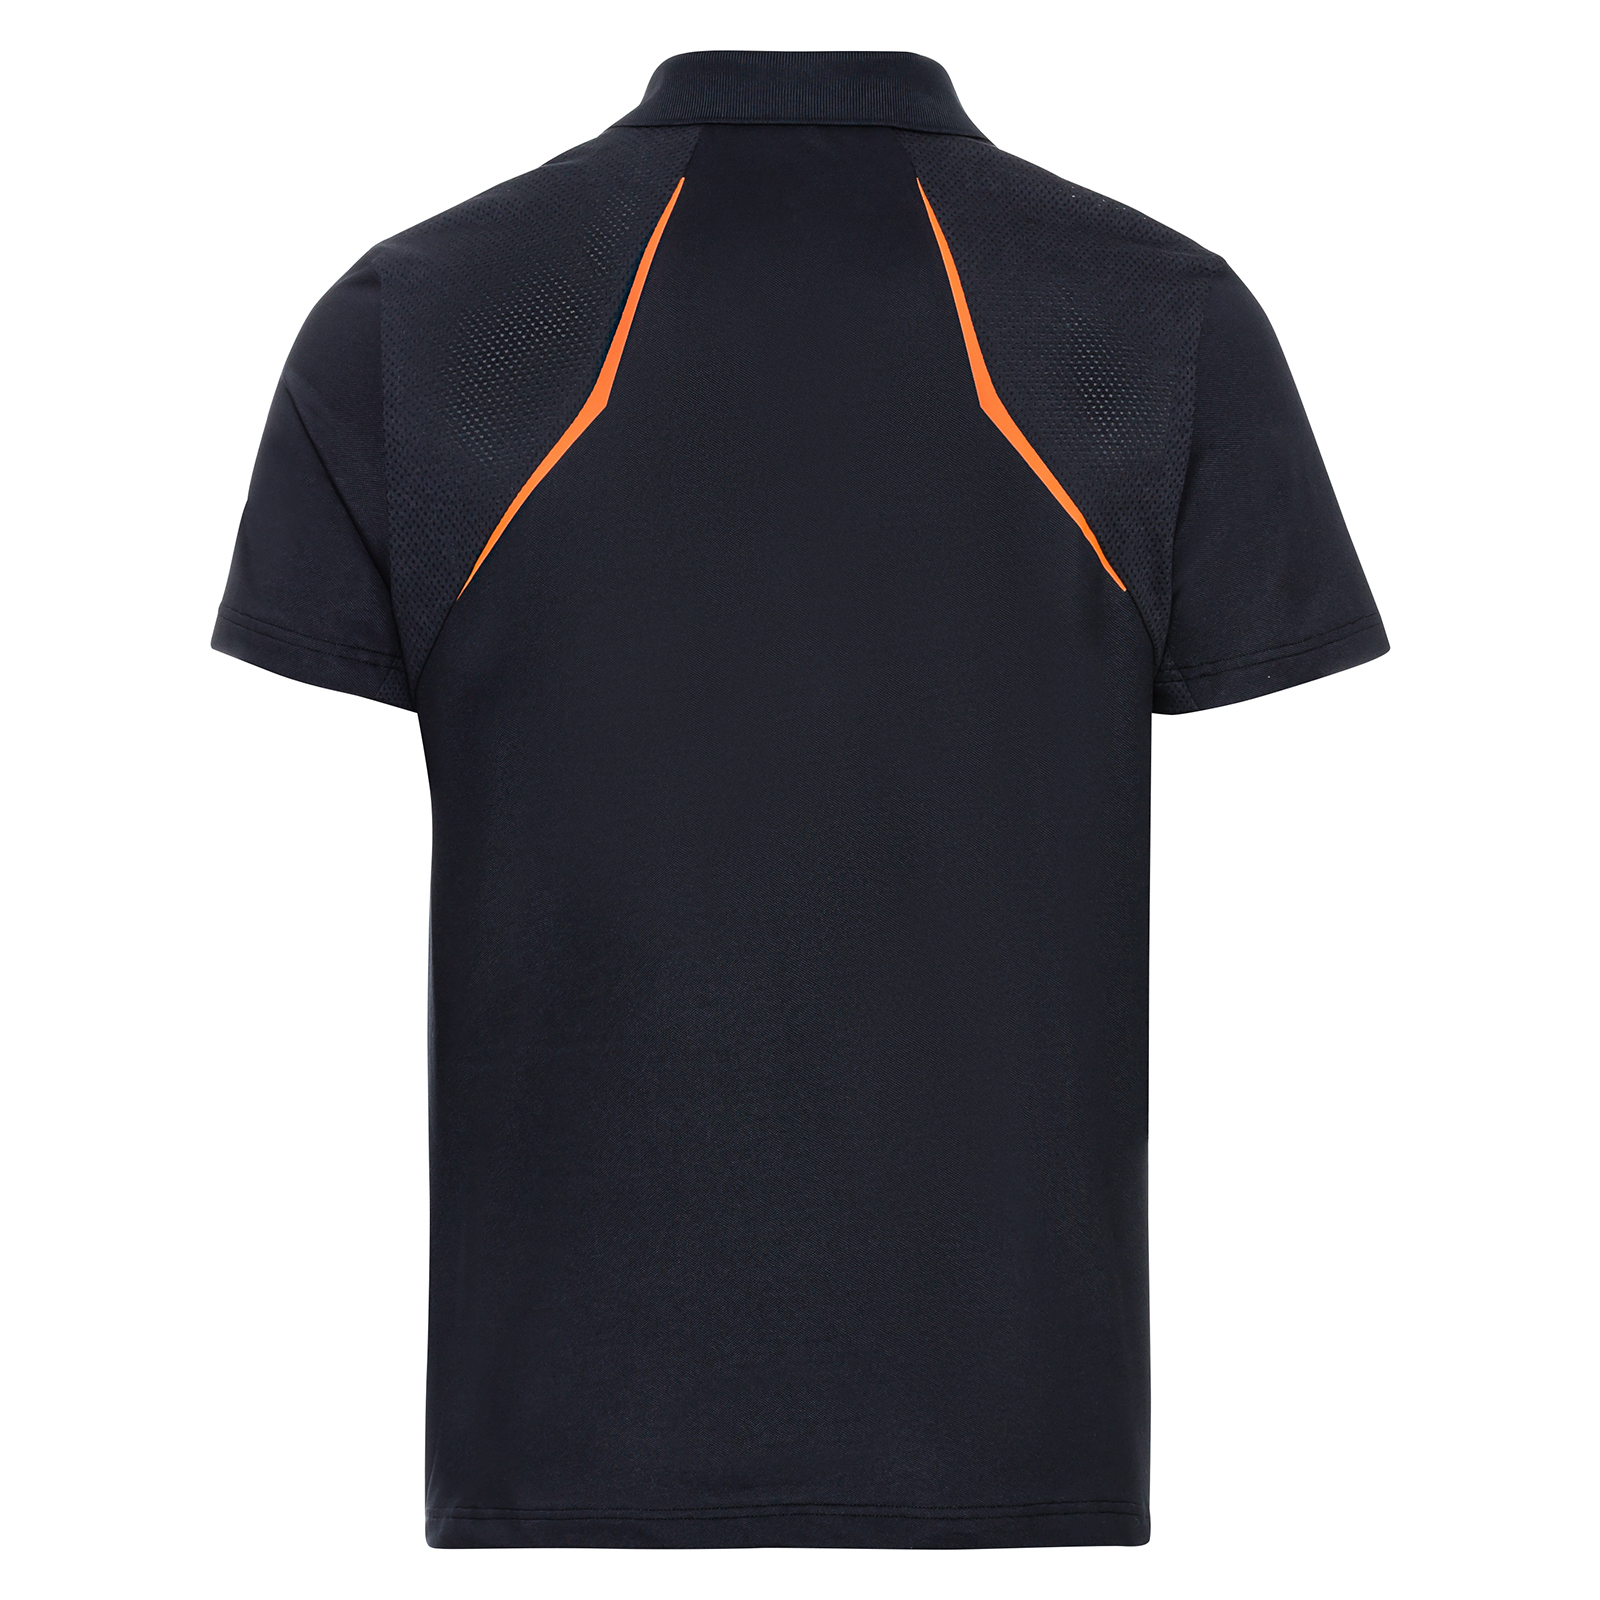 Men's breathable golf polo shirt made from recycled synthetic fibre